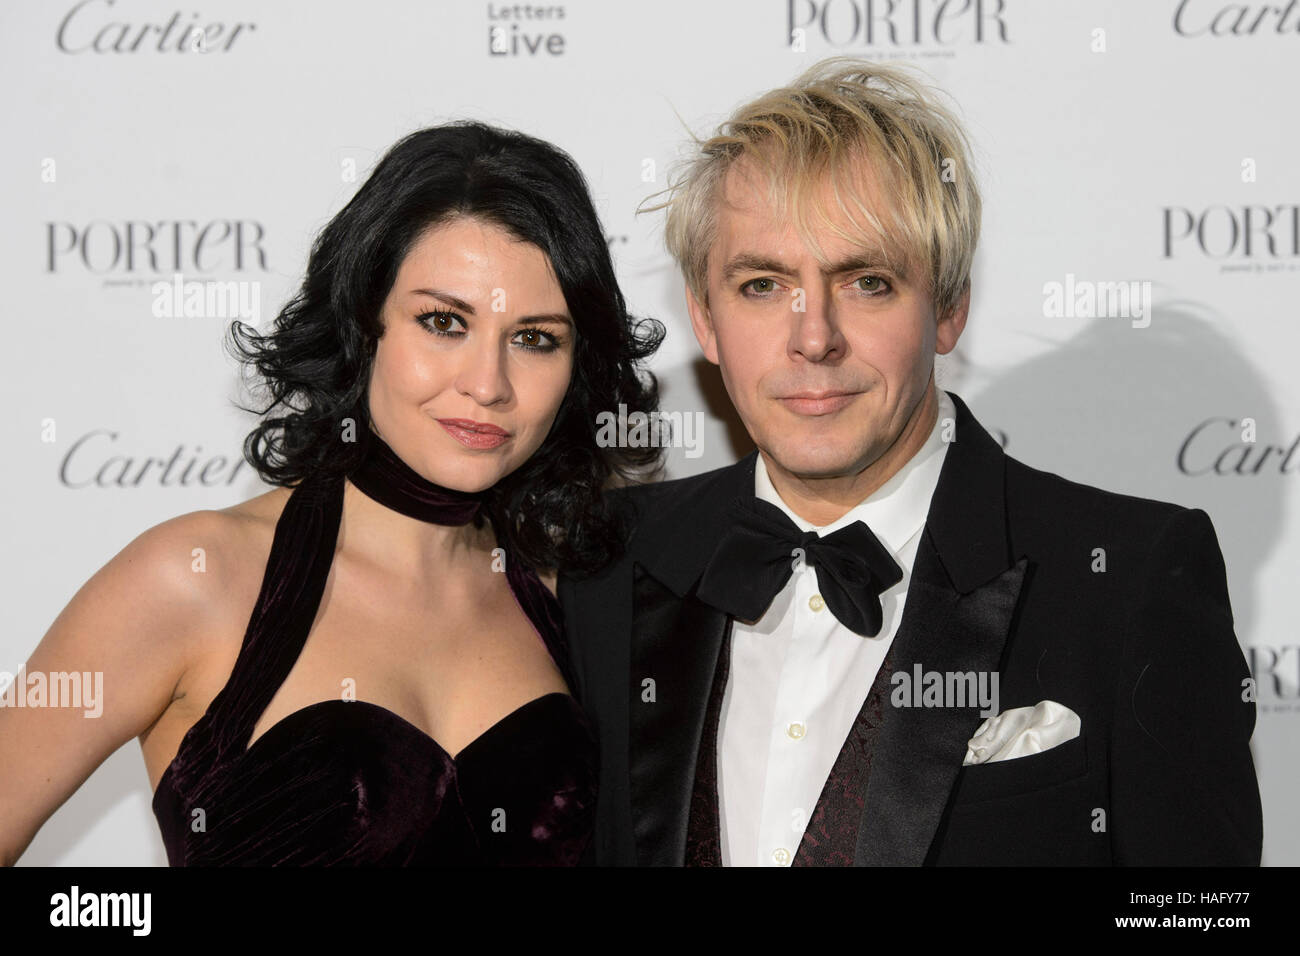 Nick Rhodes and Nefer Suvio attending the Letters Live Black Tie Gala Dinner, at the V&A, London Stock Photo